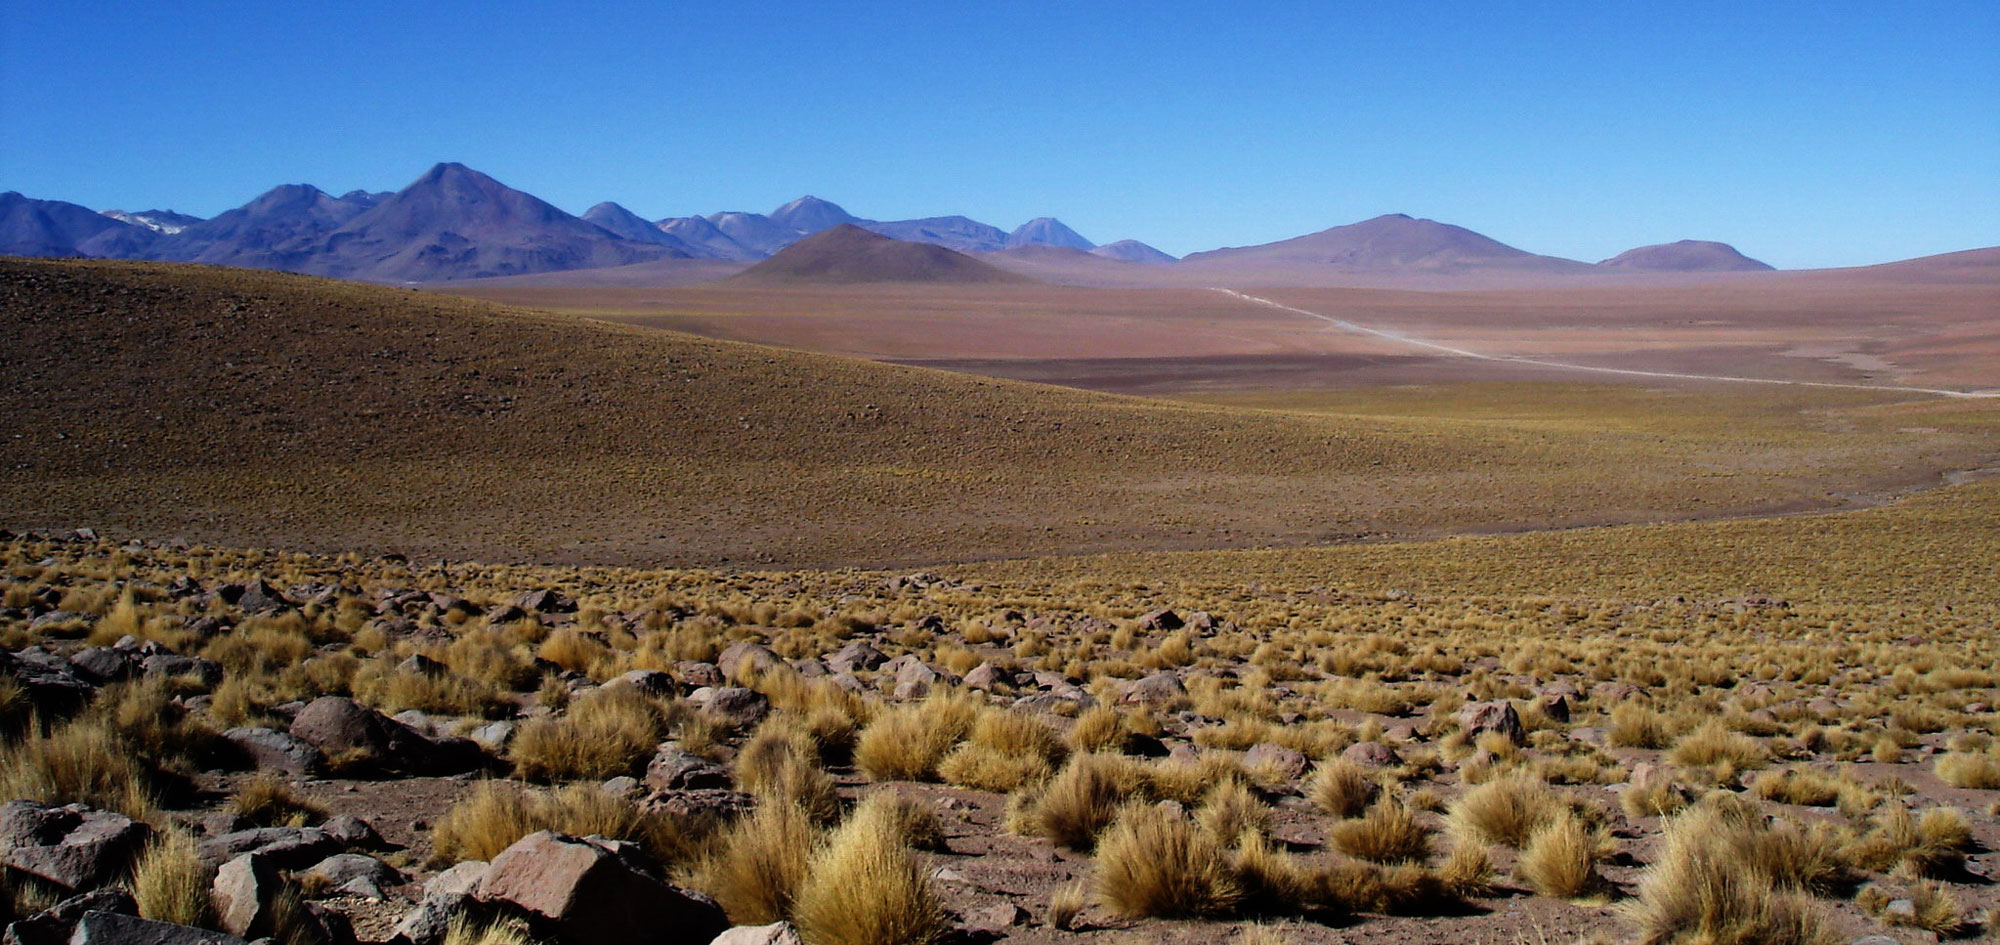 Photograph of the Chilean altiplano grassland. The photo shows gently rolling hills in the foreground and higher mountains in the background. The hills in the foreground are covered with yellow clumps of grass separated by rocks and patches of bare ground.